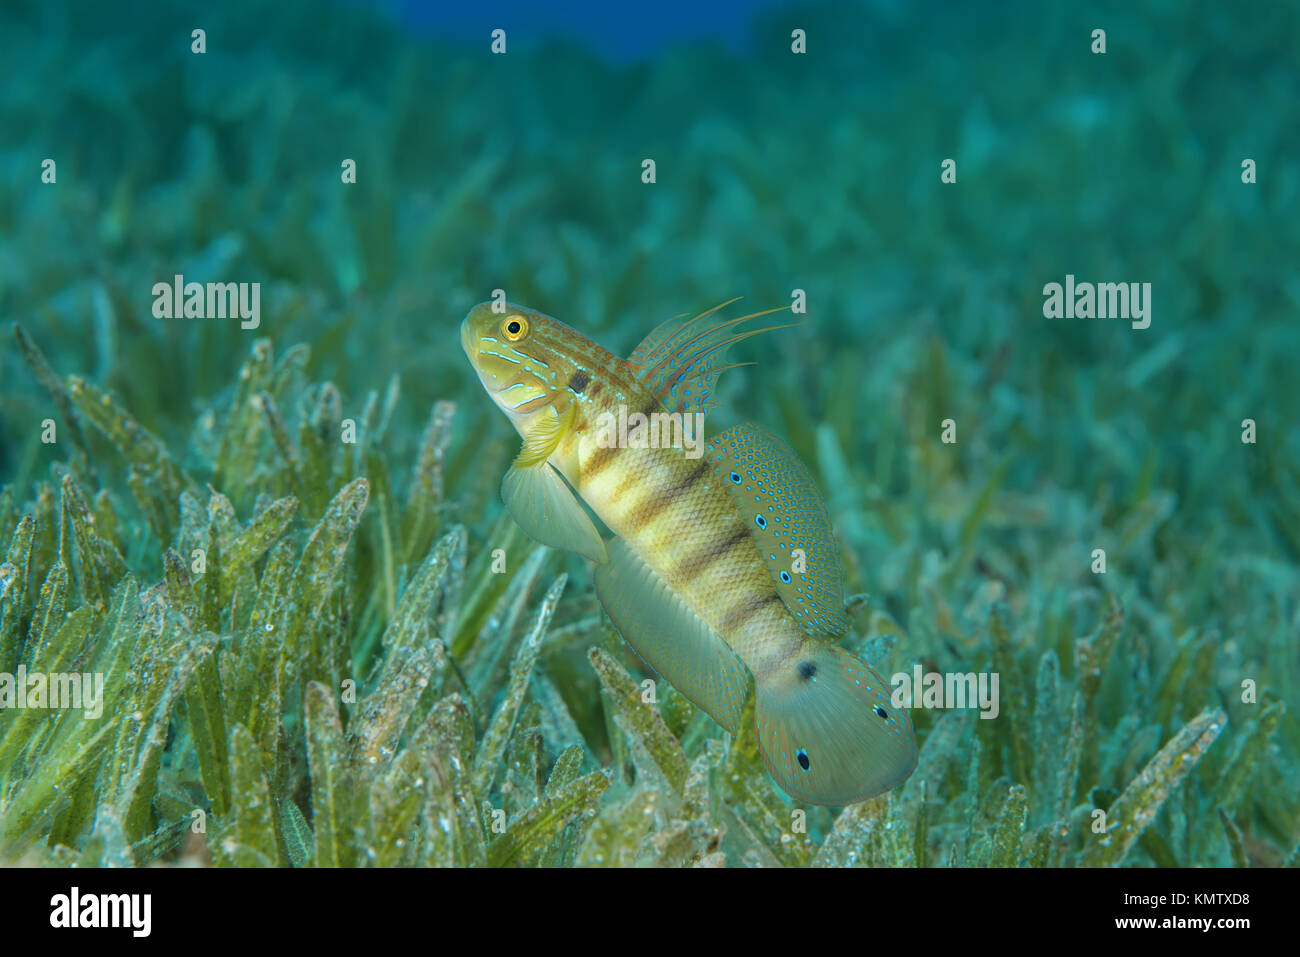 Whitelined Goby (Amblygobius albimaculatus) protects nest built in the seagrass, Red sea, Dahab, Egypt Stock Photo